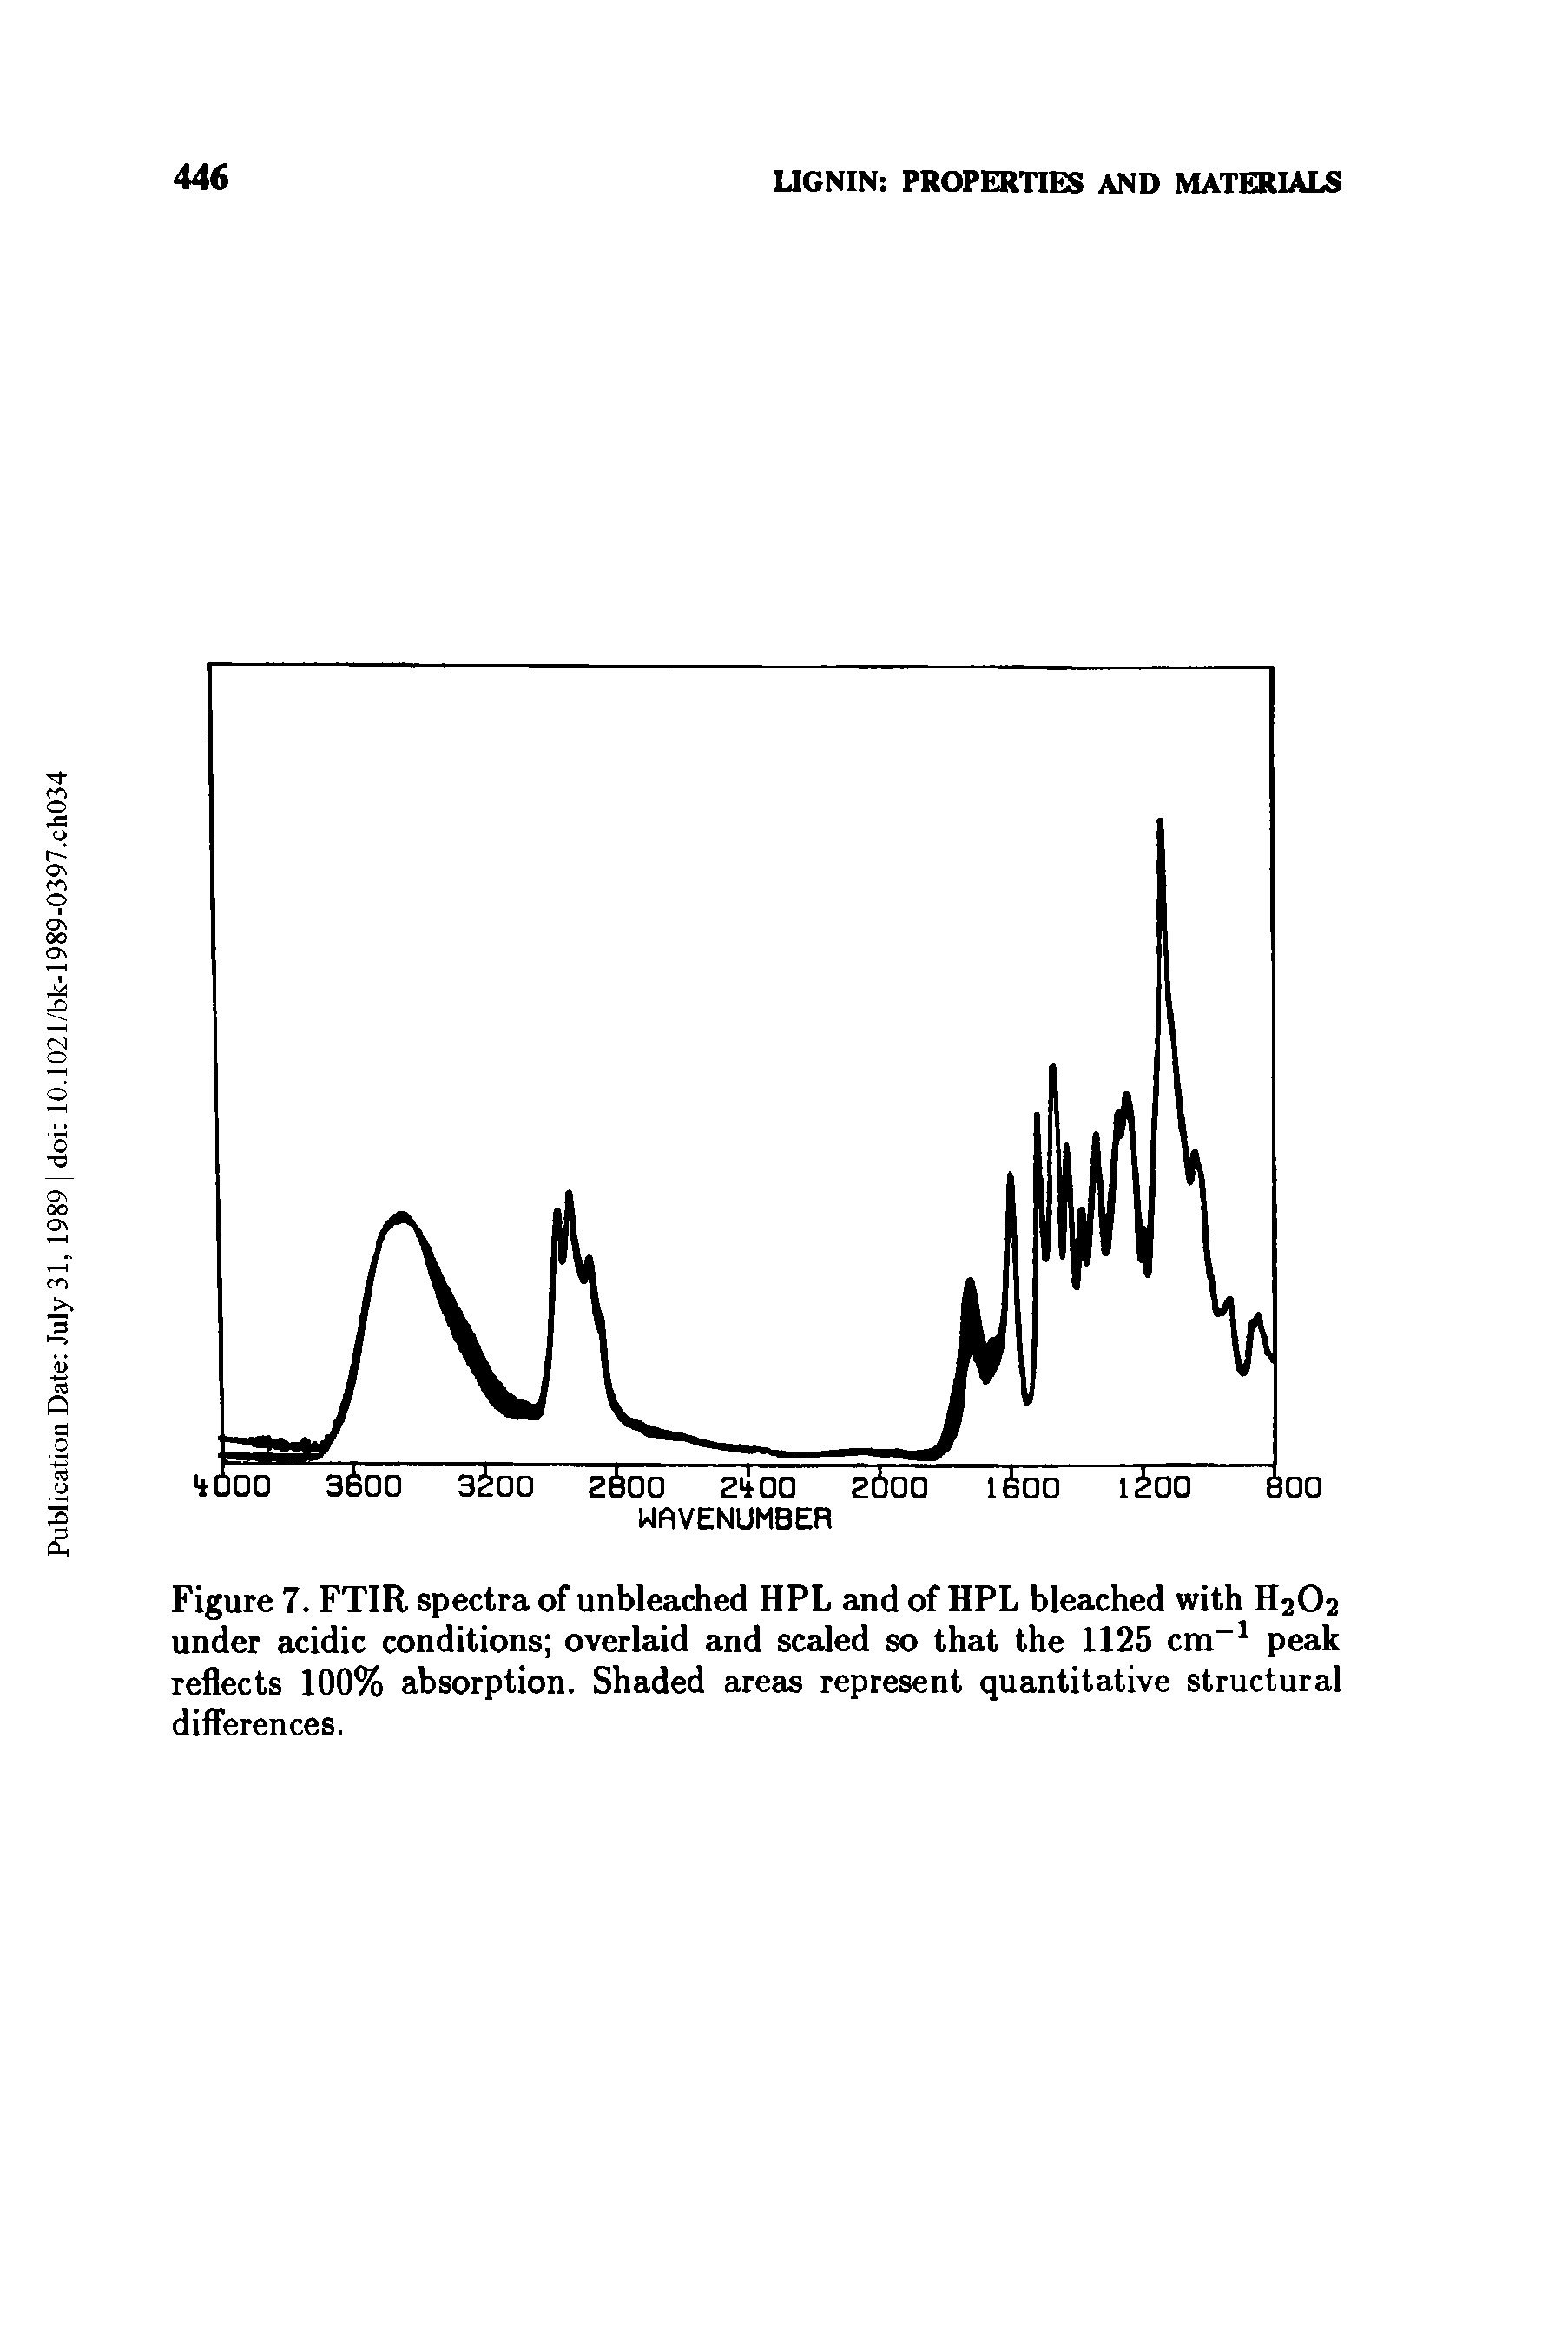 Figure 7. FTIR spectra of unbleached HPL and of HPL bleached with H2O2 under acidic conditions overlaid and scaled so that the 1125 cm-1 peak reflects 100% absorption. Shaded areas represent quantitative structural differences.